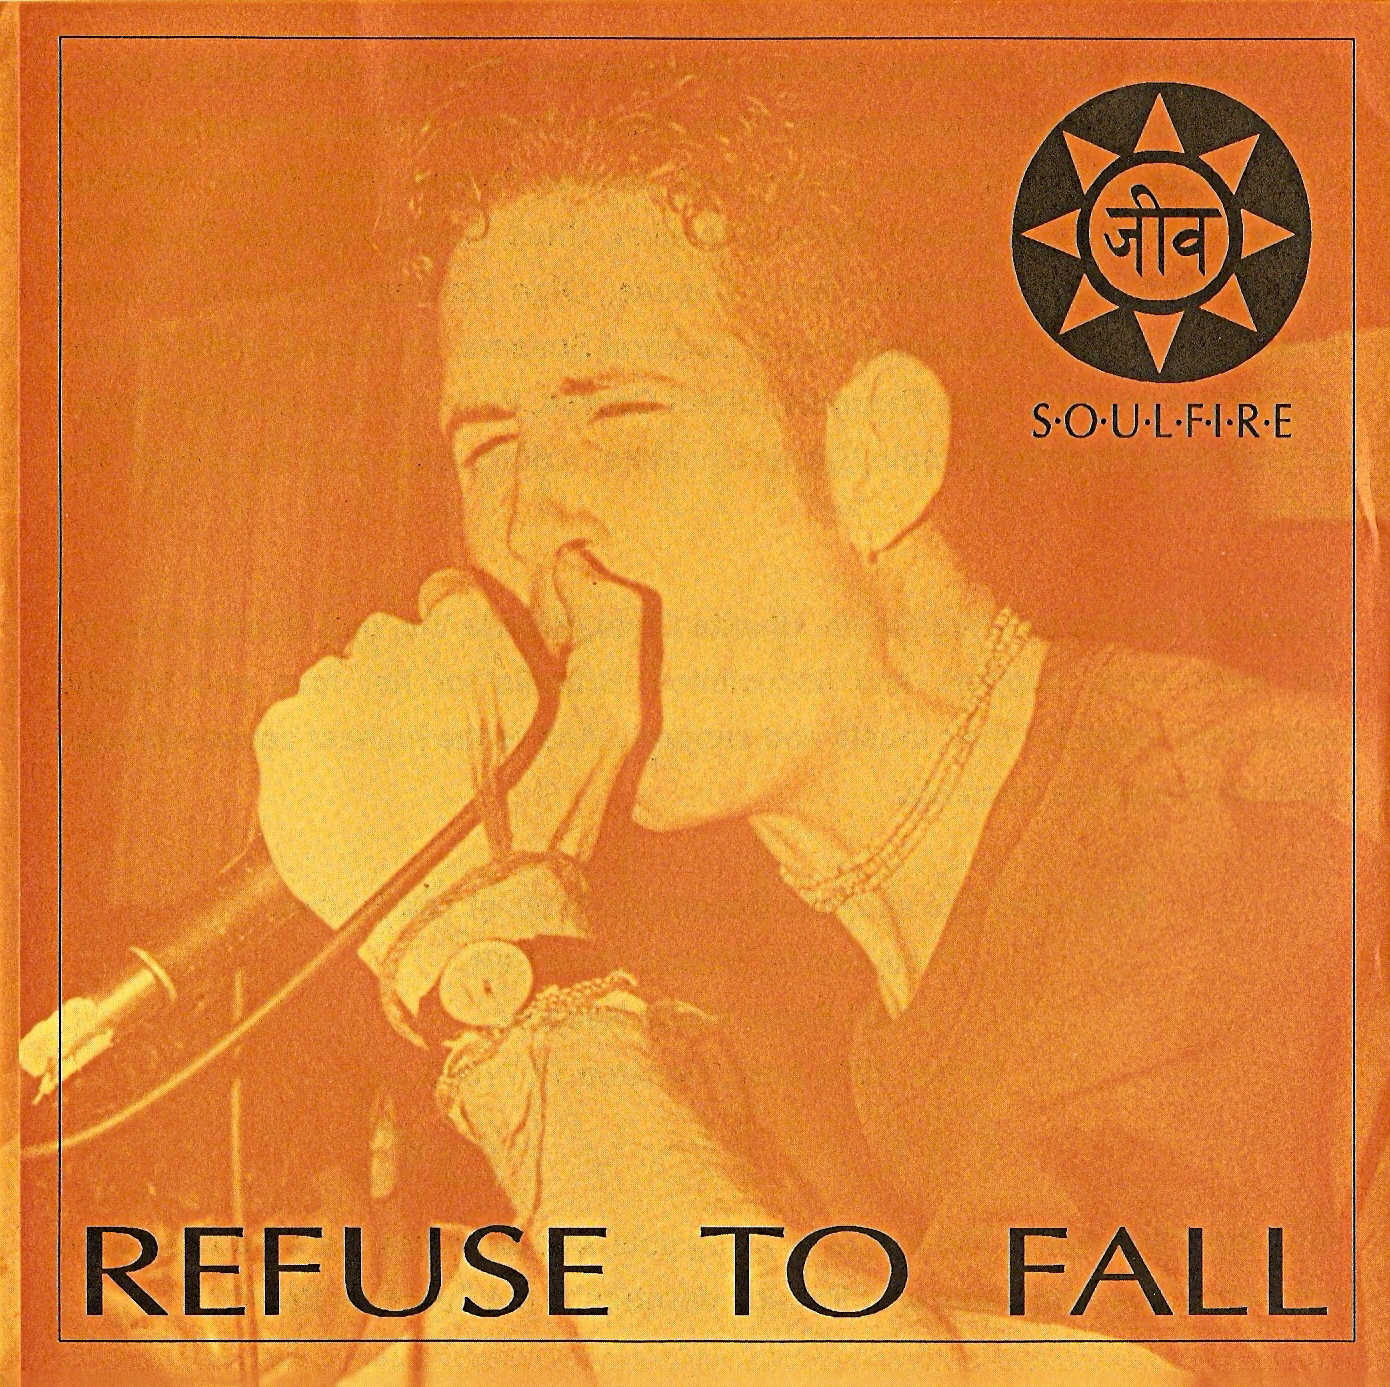 [REFUSE+TO+FALL+-+soulfire_001.jpg]